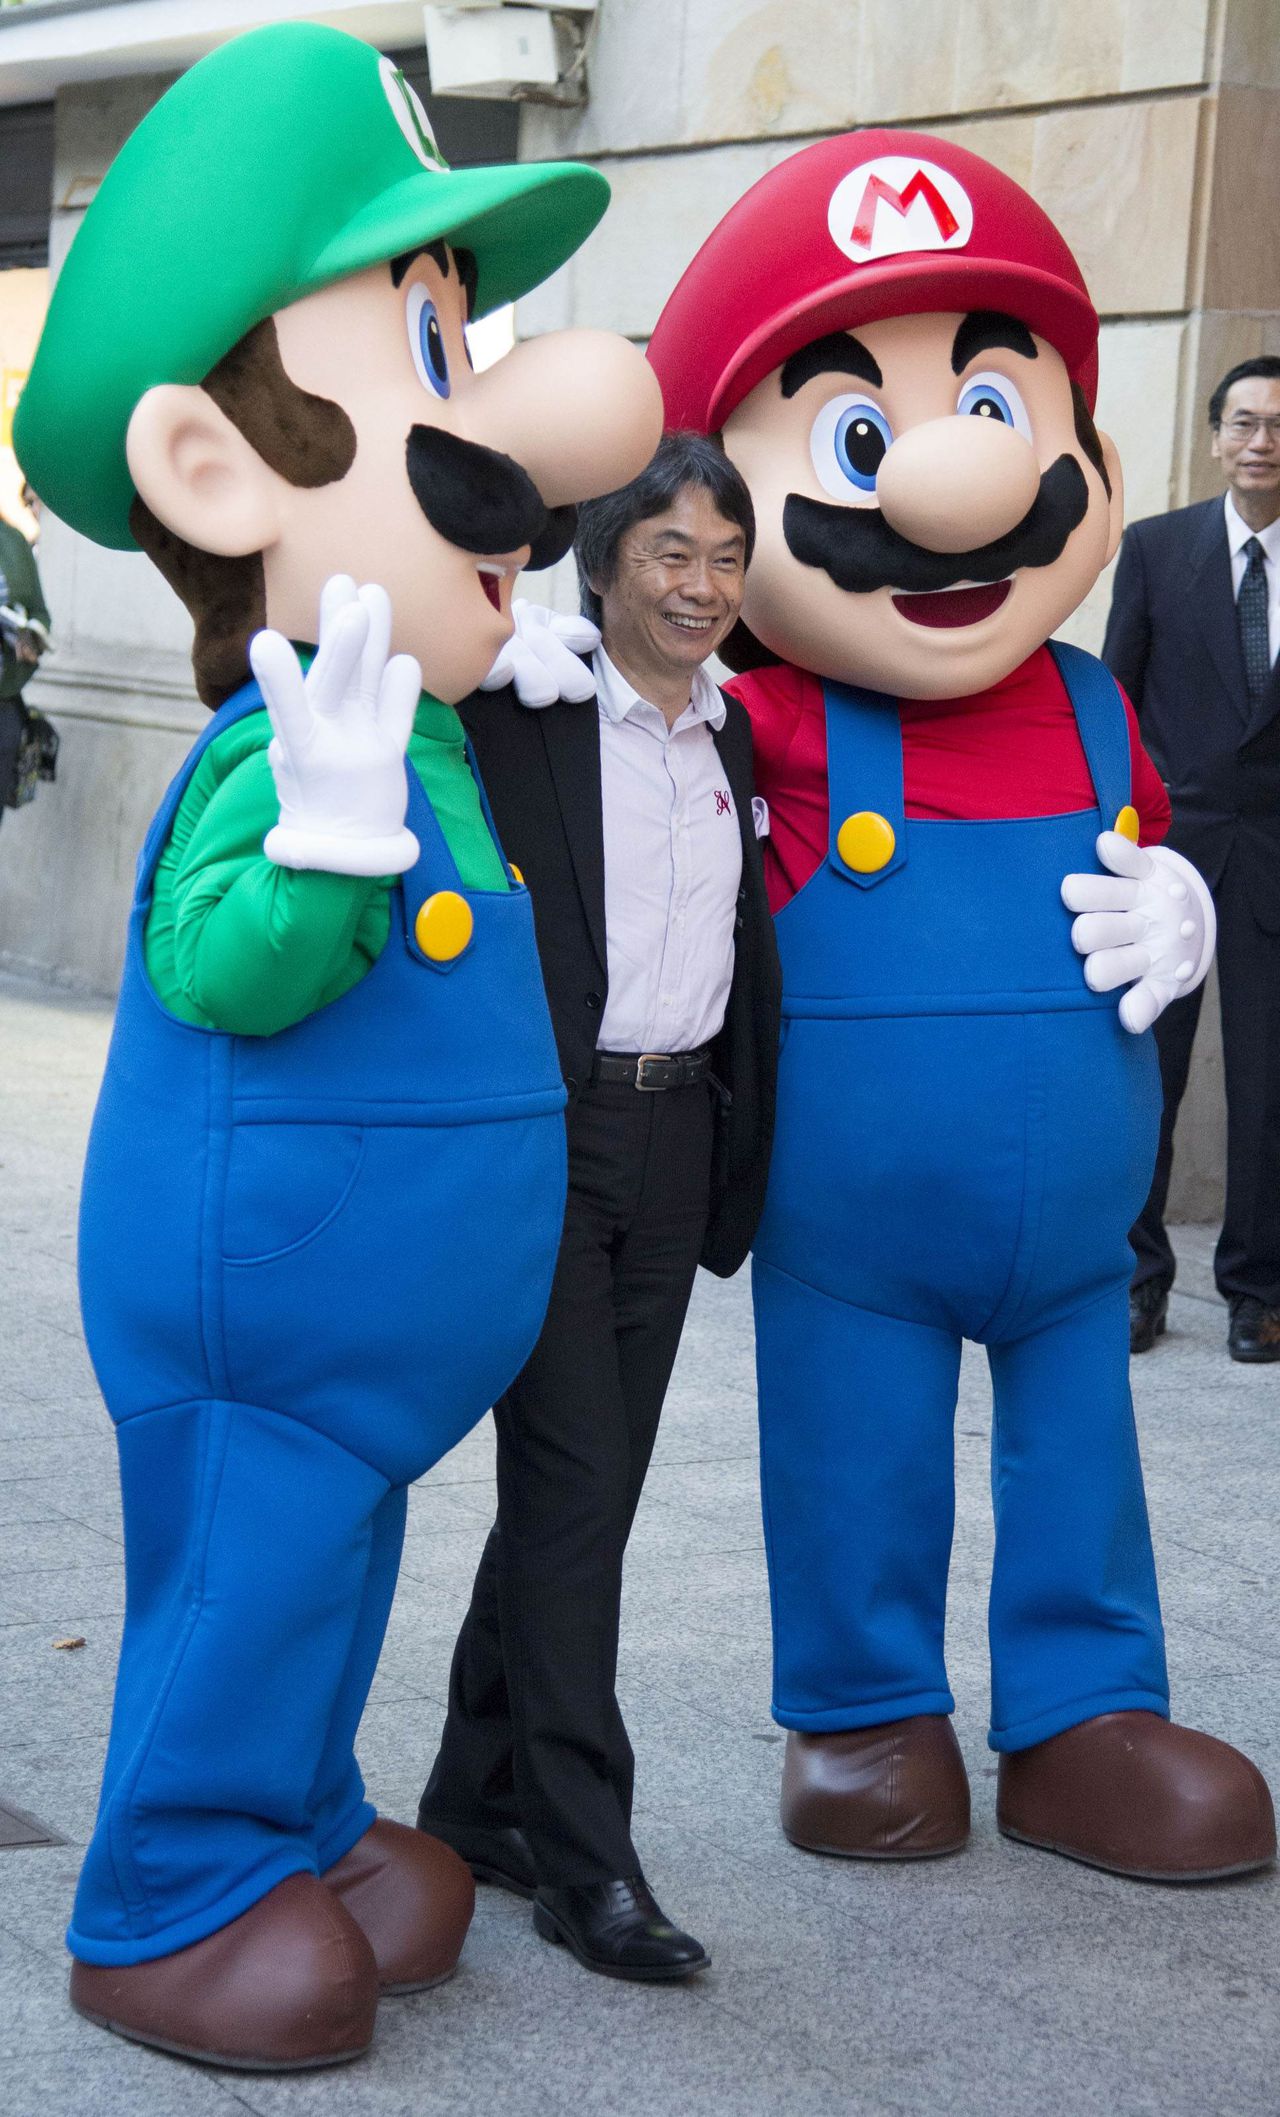 Japanese video game Designer Shigeru Miyamoto poses with men dressed as Mario Bros characters during a tribute in Gijon, October 25, 2012. Miyamoto will be awarded the 2012 Prince of Asturias Award for Communication and Humanities. The Prince of Asturias Awards are held annually since 1981 to reward scientific, technical, cultural, social and humanitarian work done by individuals, work teams and institutions. REUTERS/Felix Ordonez (SPAIN - Tags: ENTERTAINMENT SOCIETY)